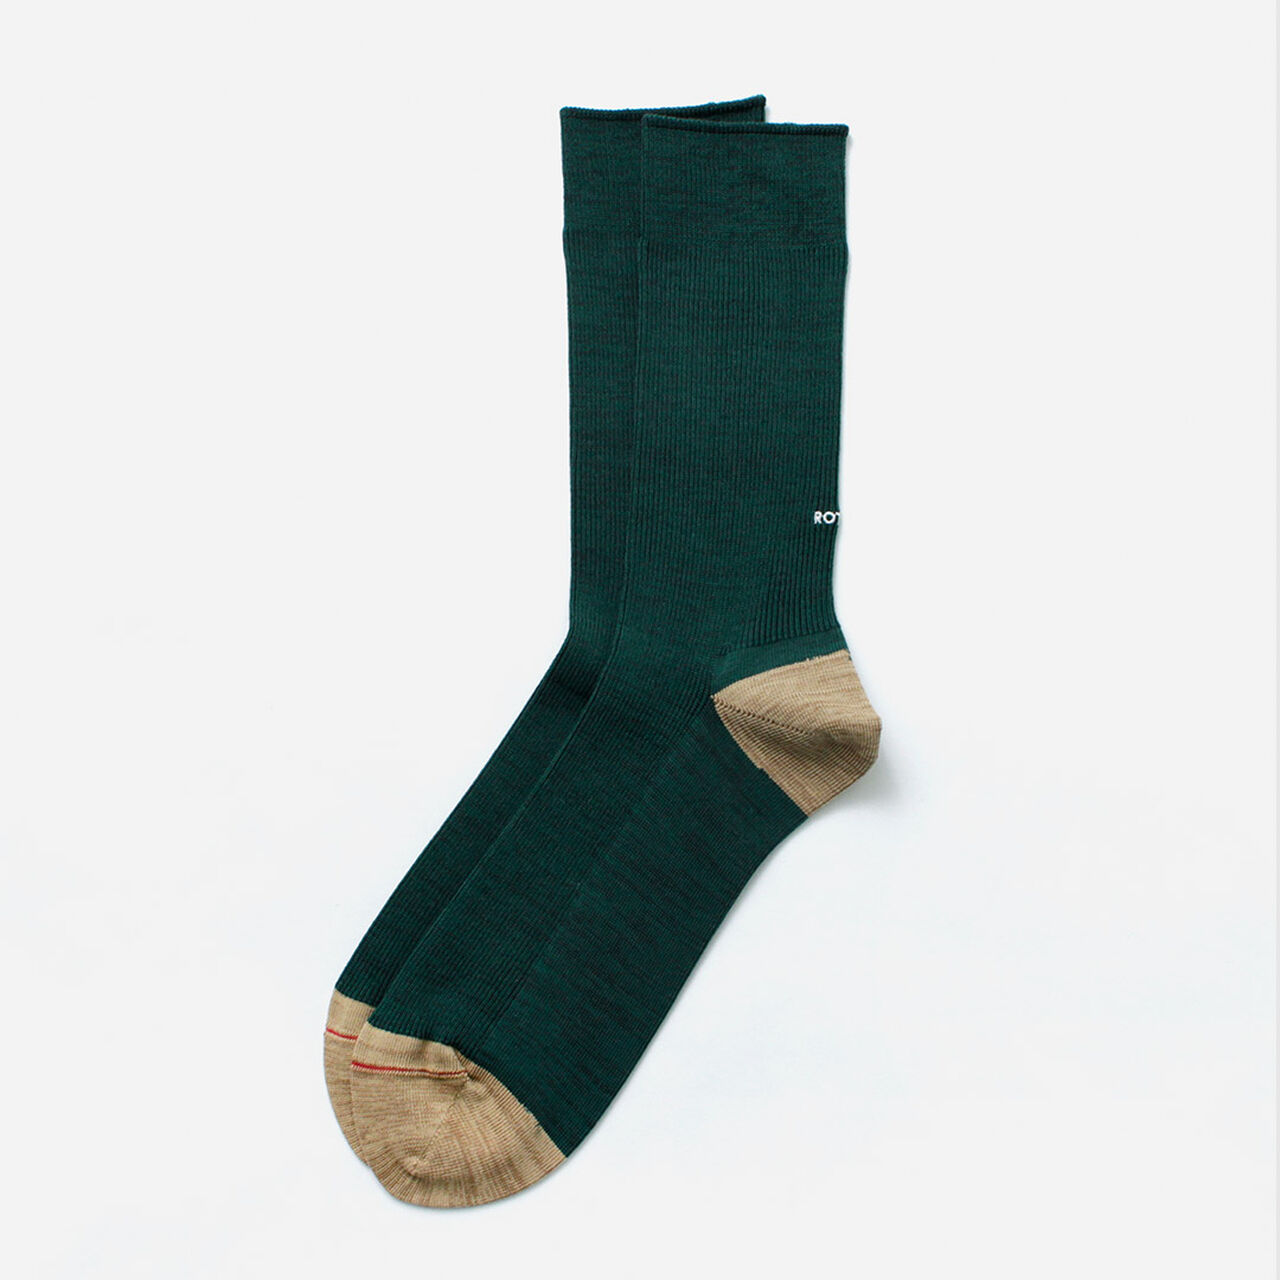 Organic Cotton & Recycled Polyester Ribbed Crew Socks,DarkGreen_Beige, large image number 0